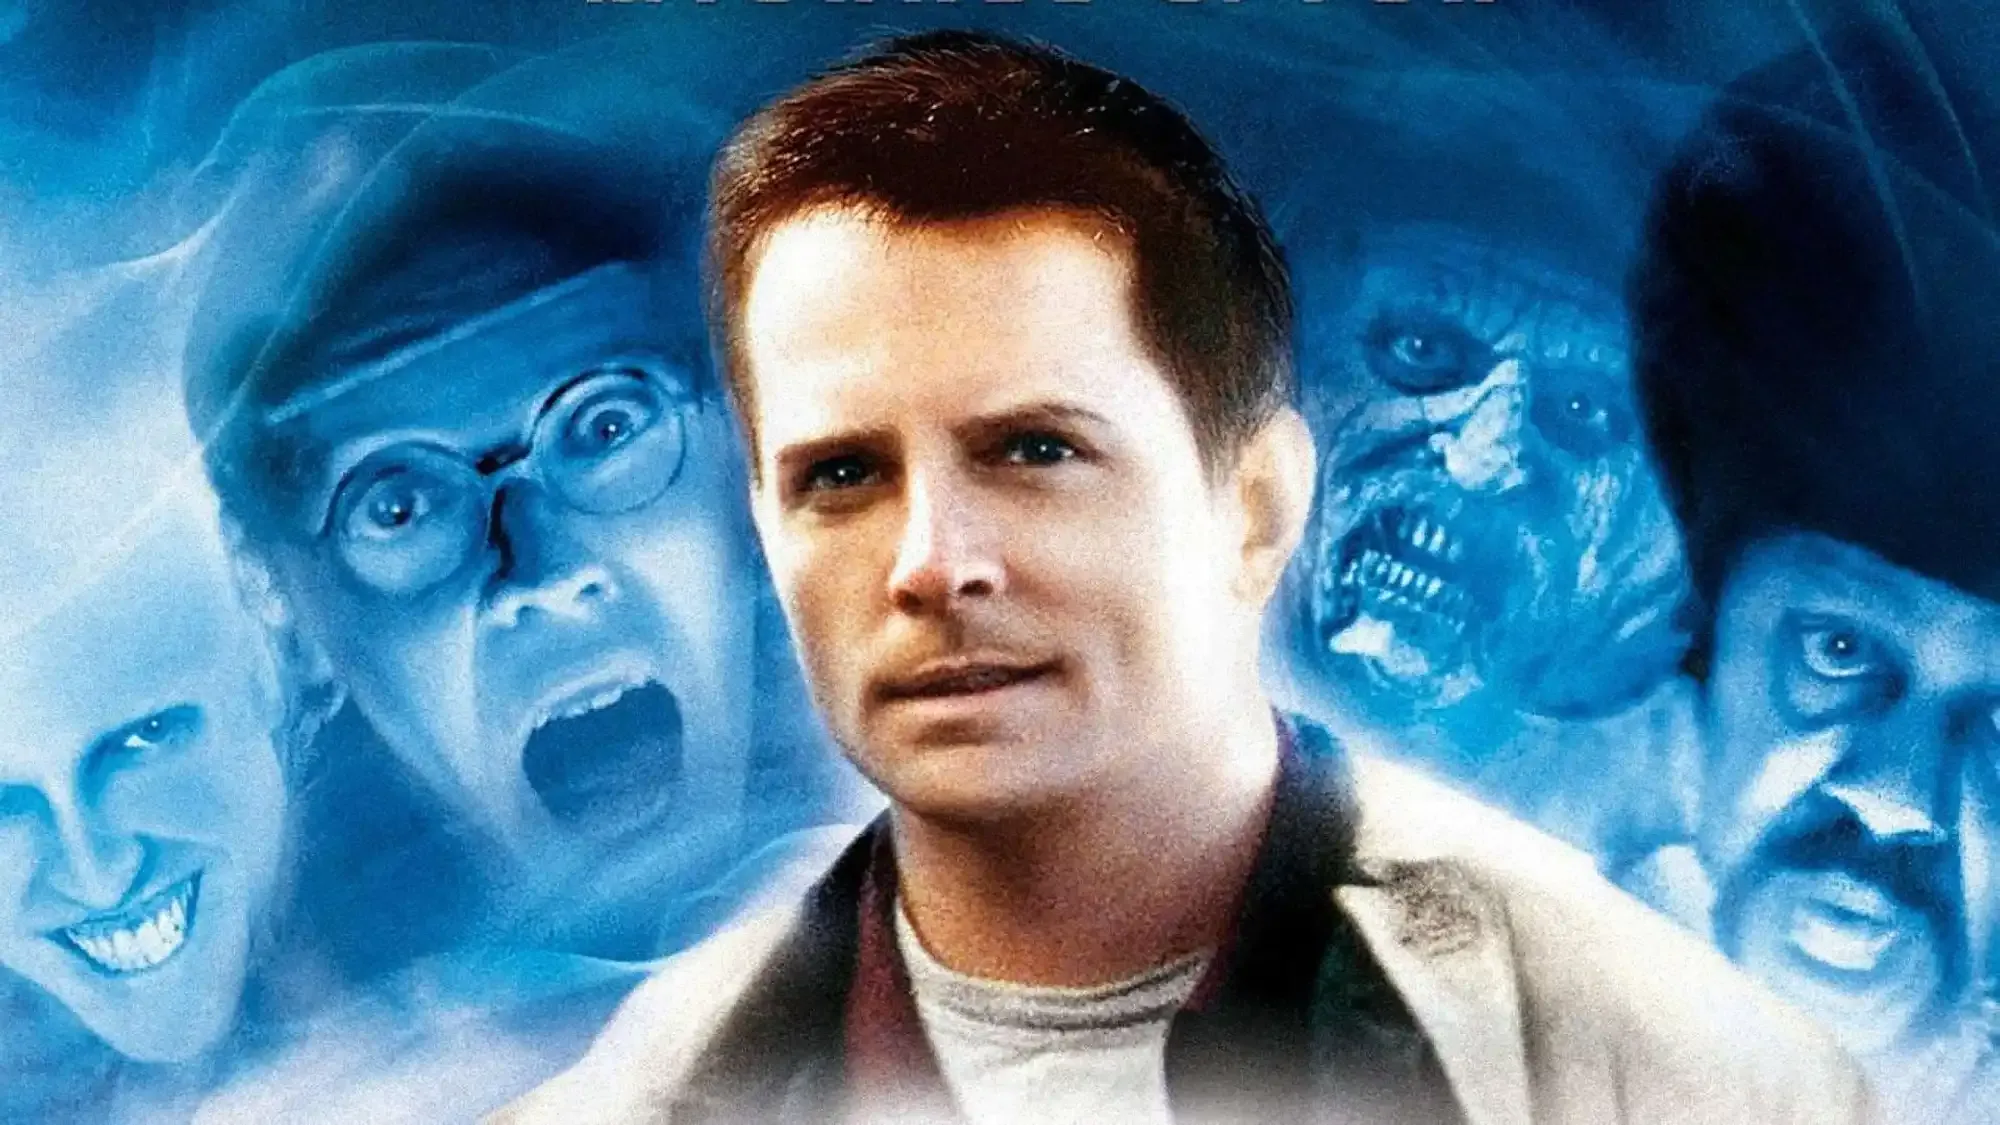 The Frighteners movie review